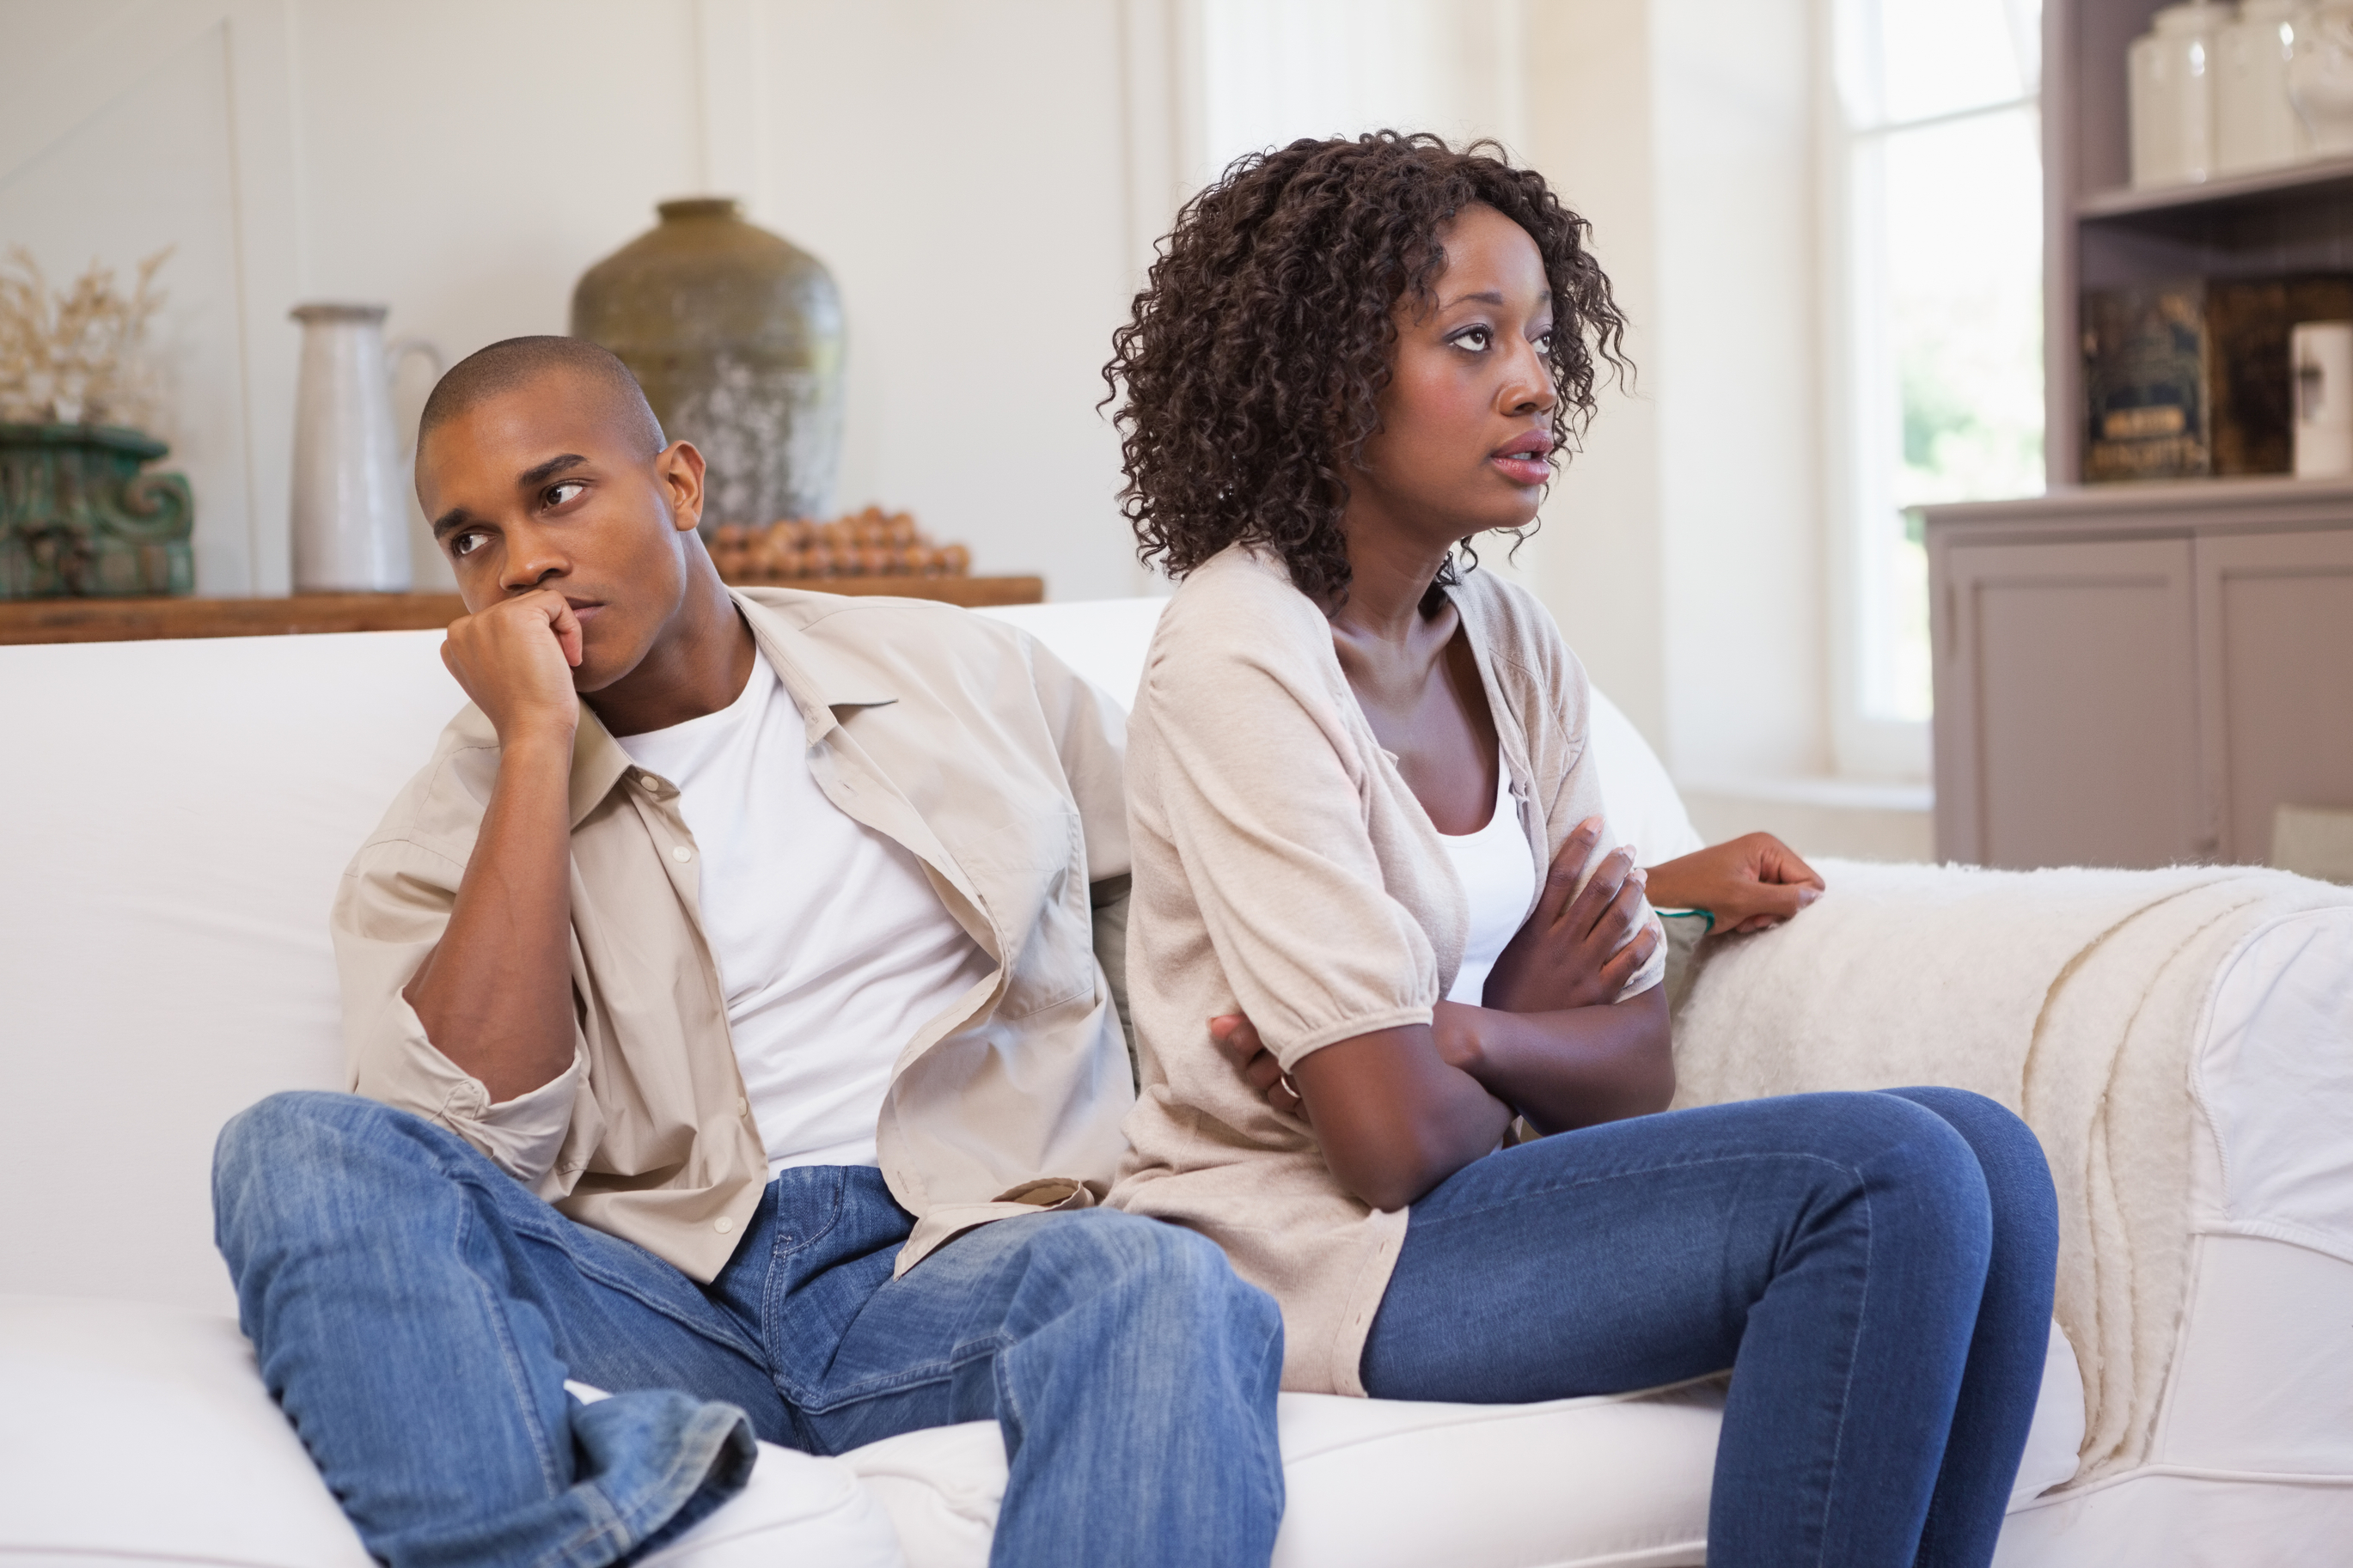 See Why Only Few Relationships Will Survive This Xmas